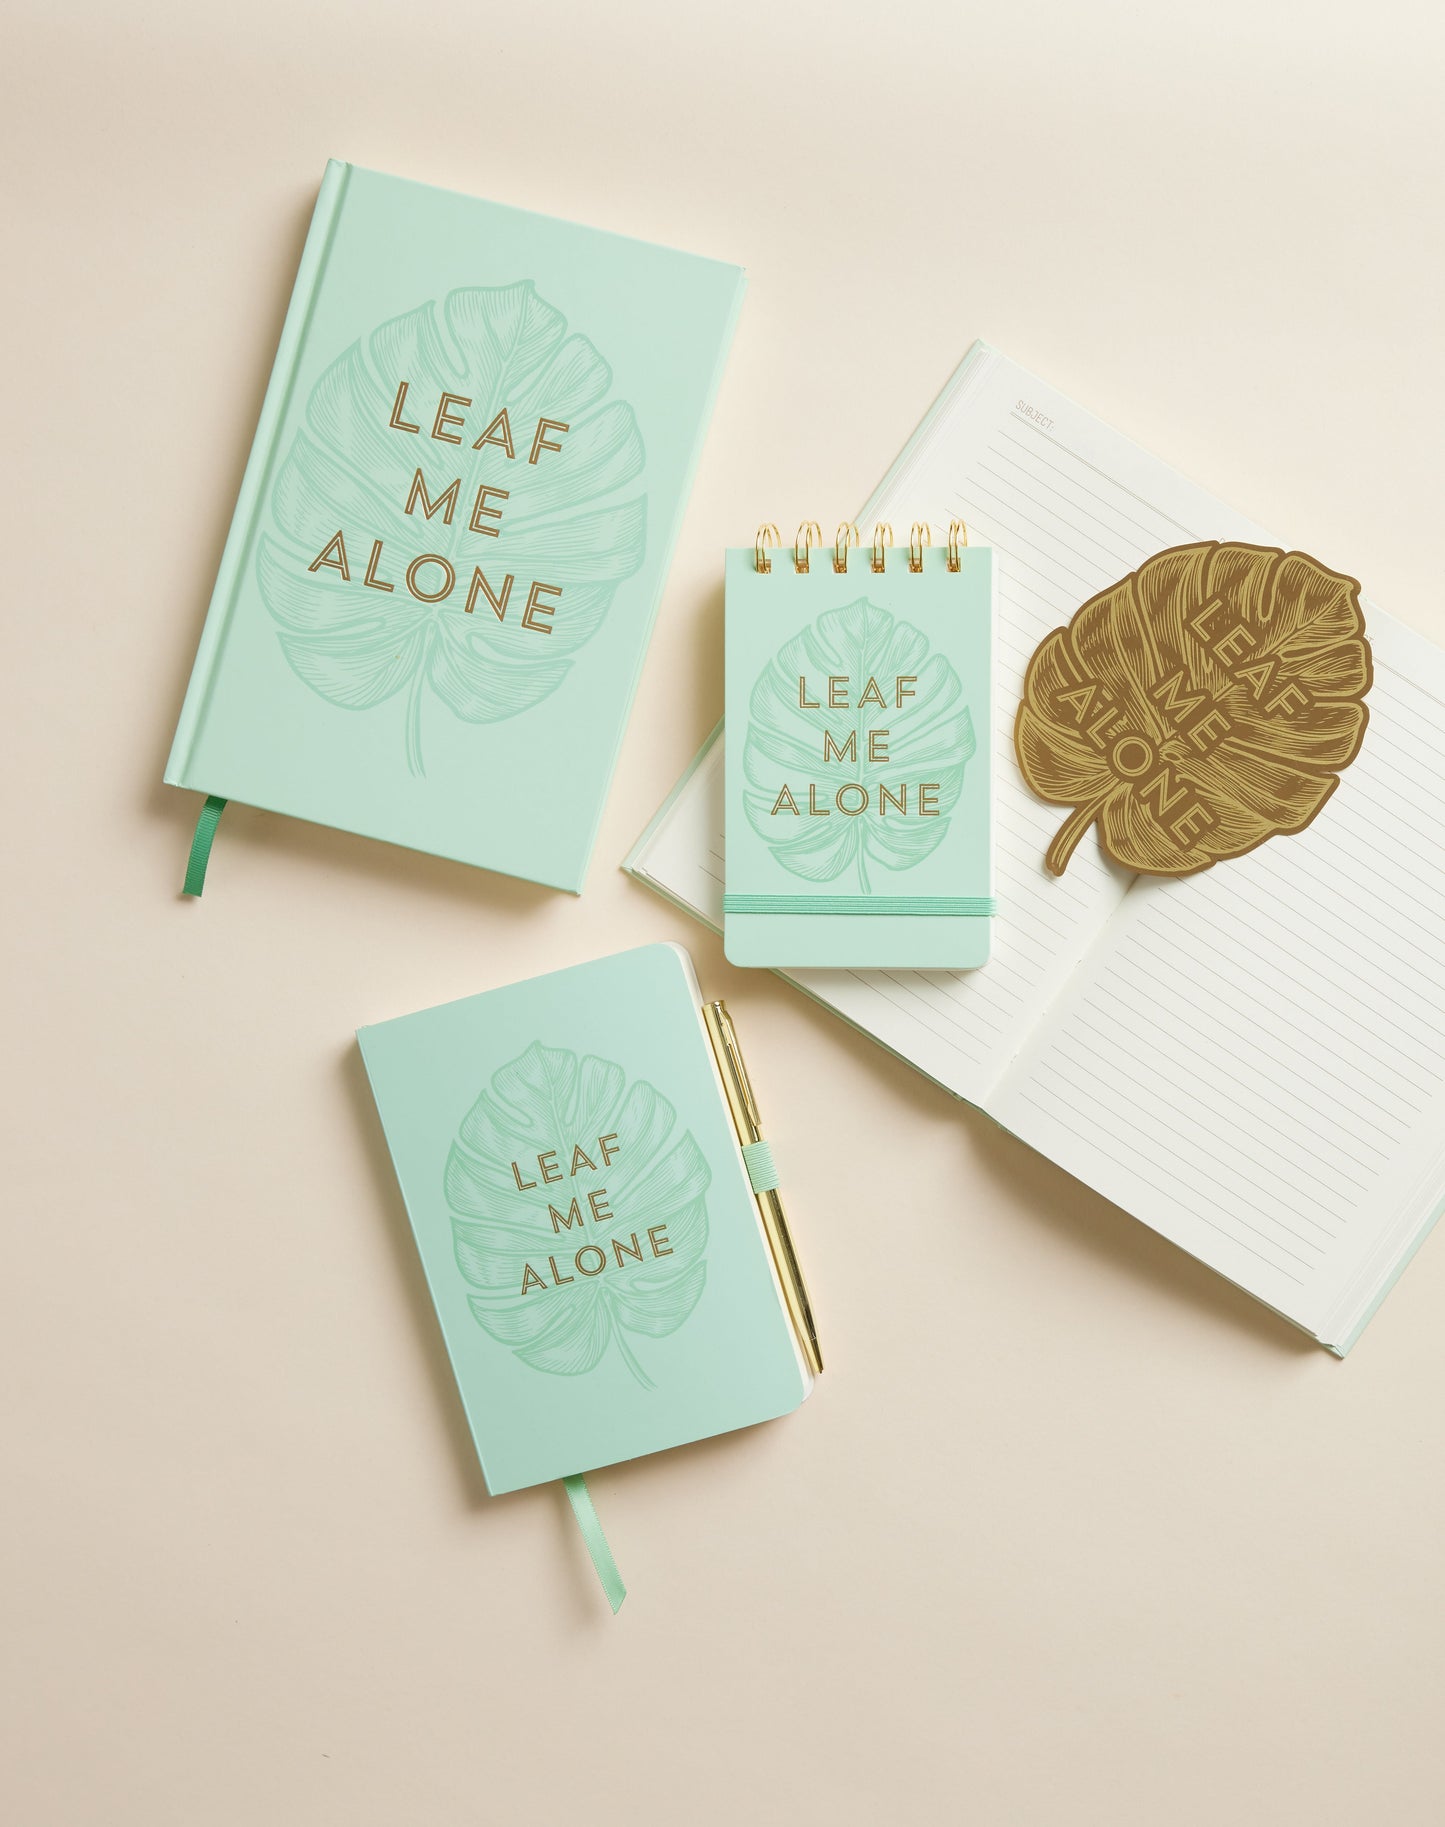 Vintage Sass Notebook with Pen - Leaf Me Alone